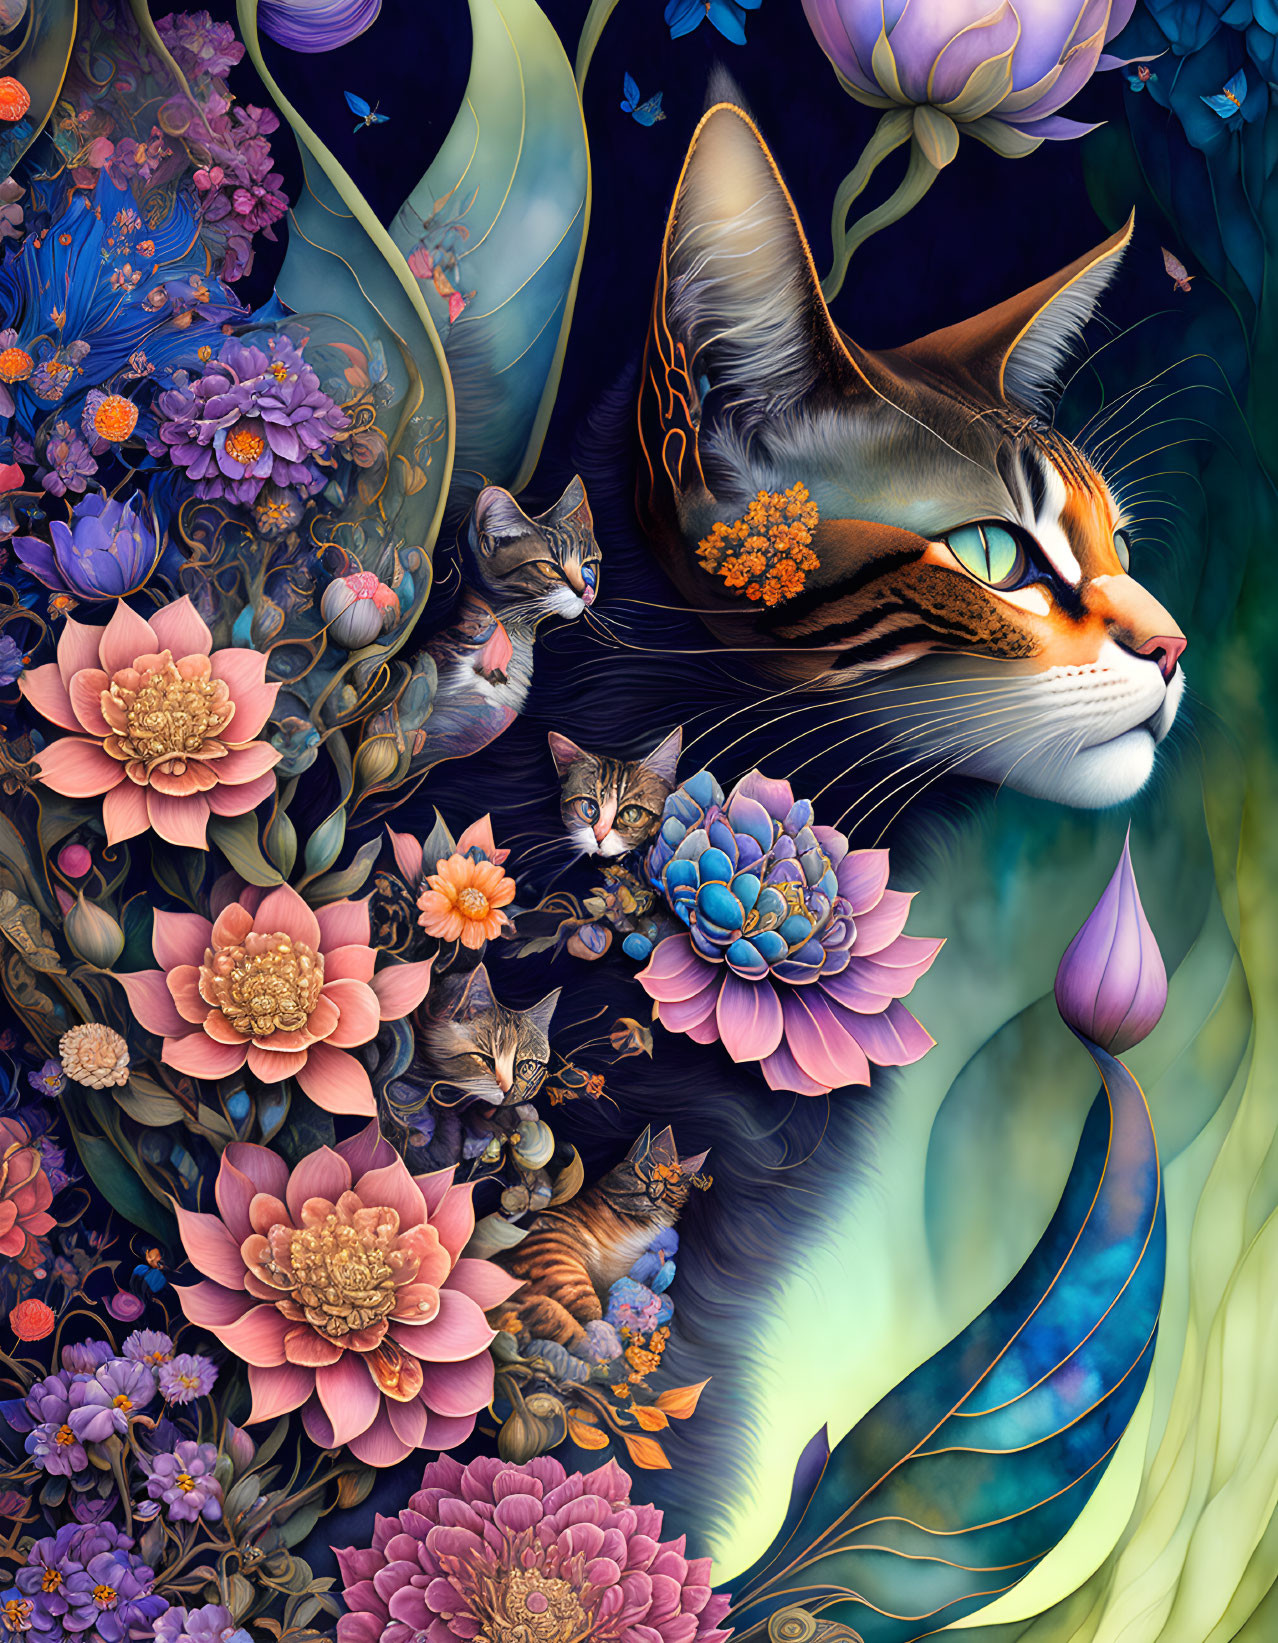 Colorful Cat and Flowers Illustration on Dark Blue Background